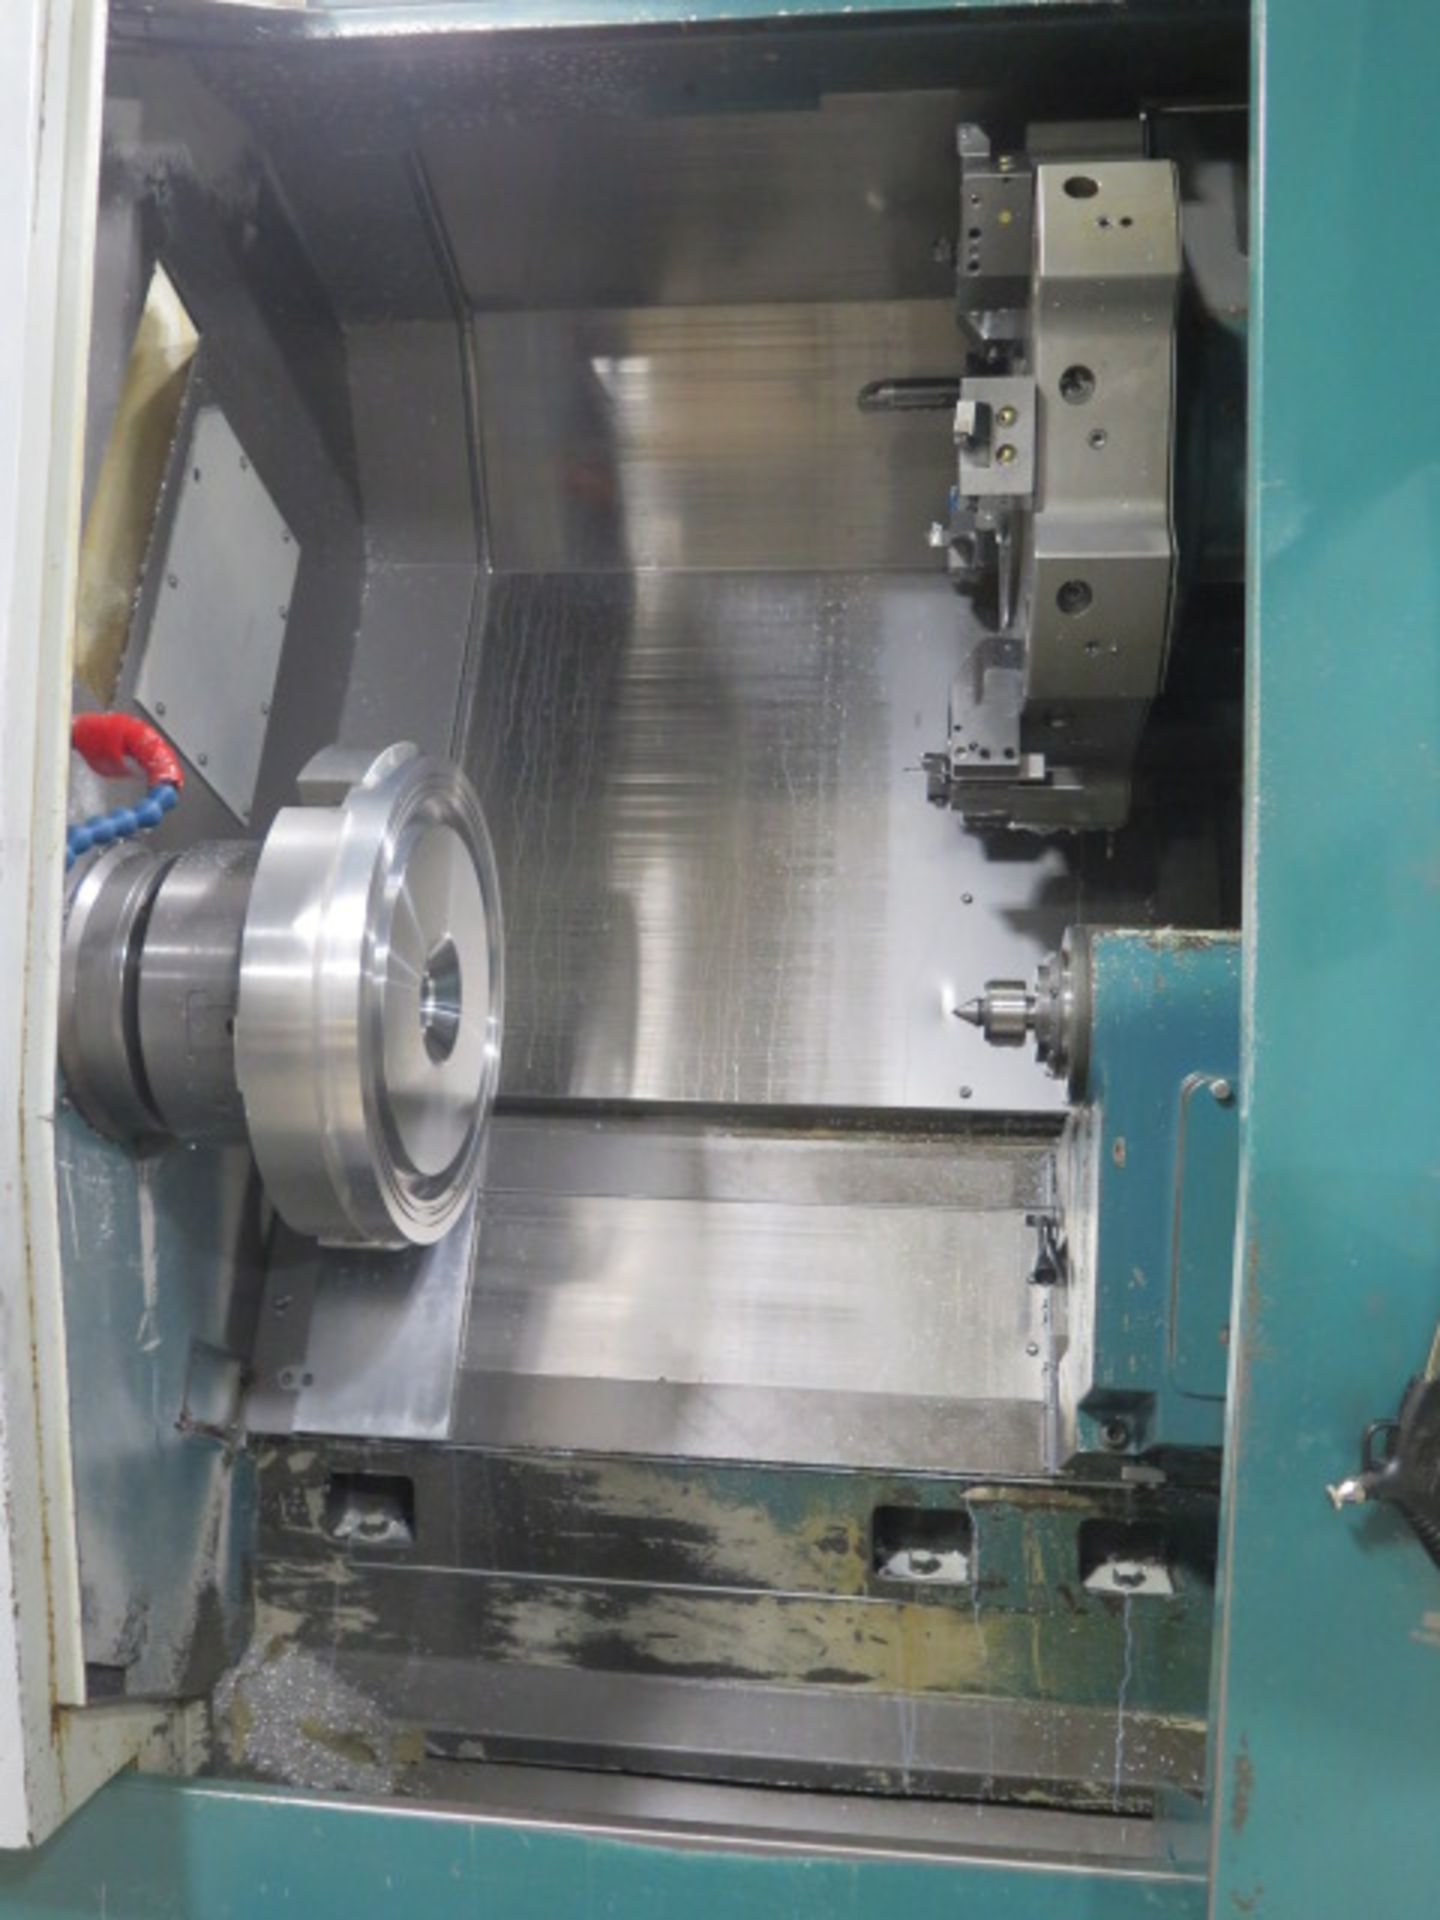 Nakamura-Tome TMC-400 CNC Turning Center s/n C401202 w/ Fanuc Series 16-T Controls, 12-Station Turre - Image 7 of 15